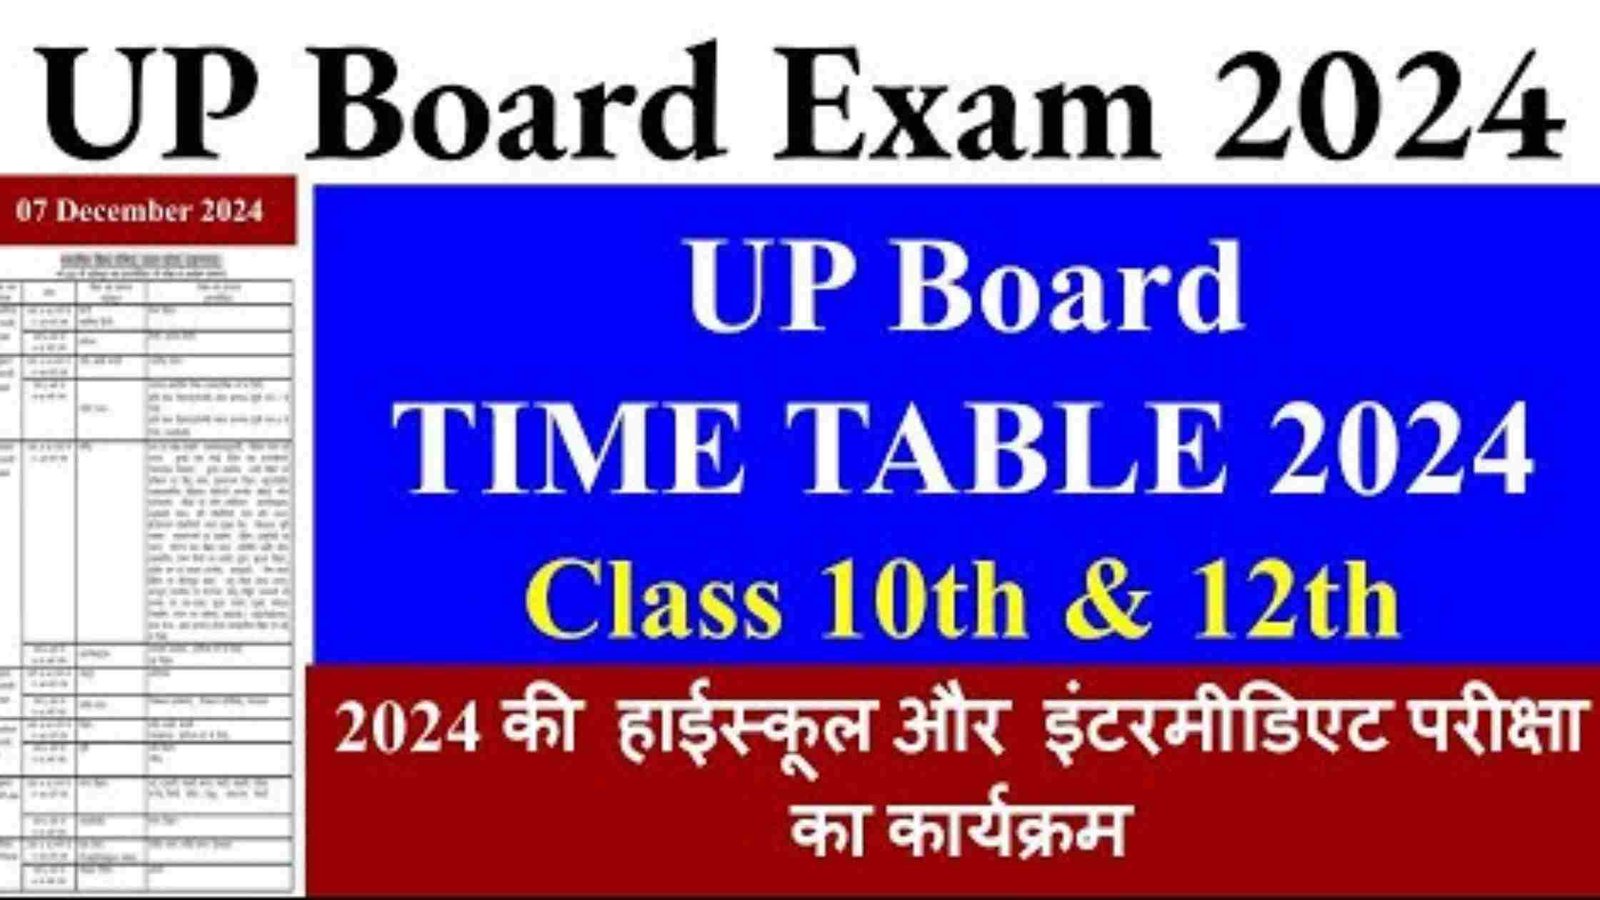 UP Board exam Time Table 2024,